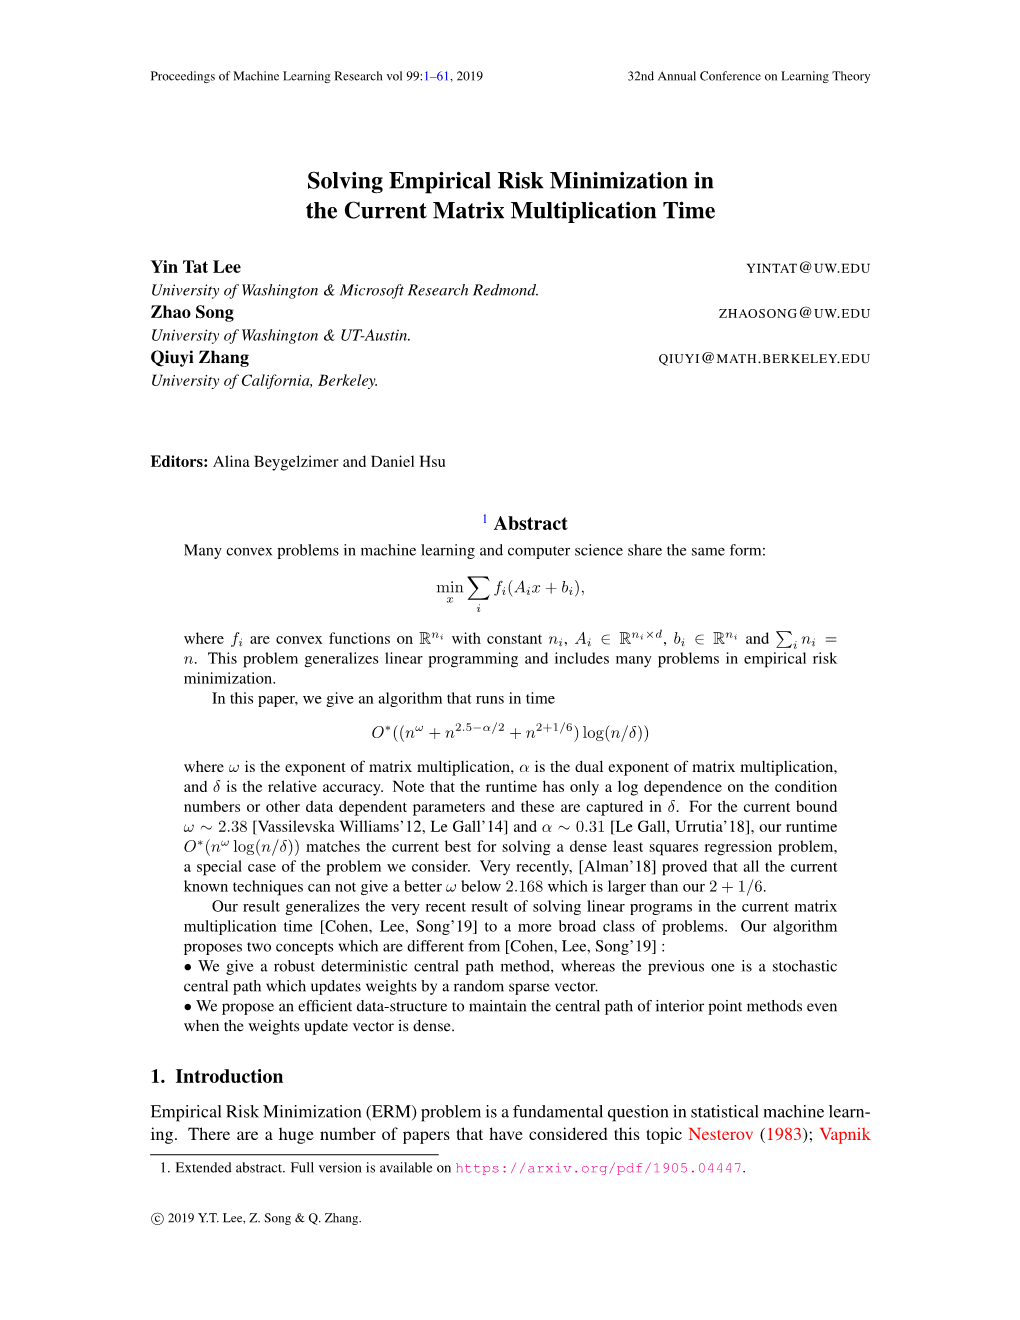 Solving Empirical Risk Minimization in the Current Matrix Multiplication Time